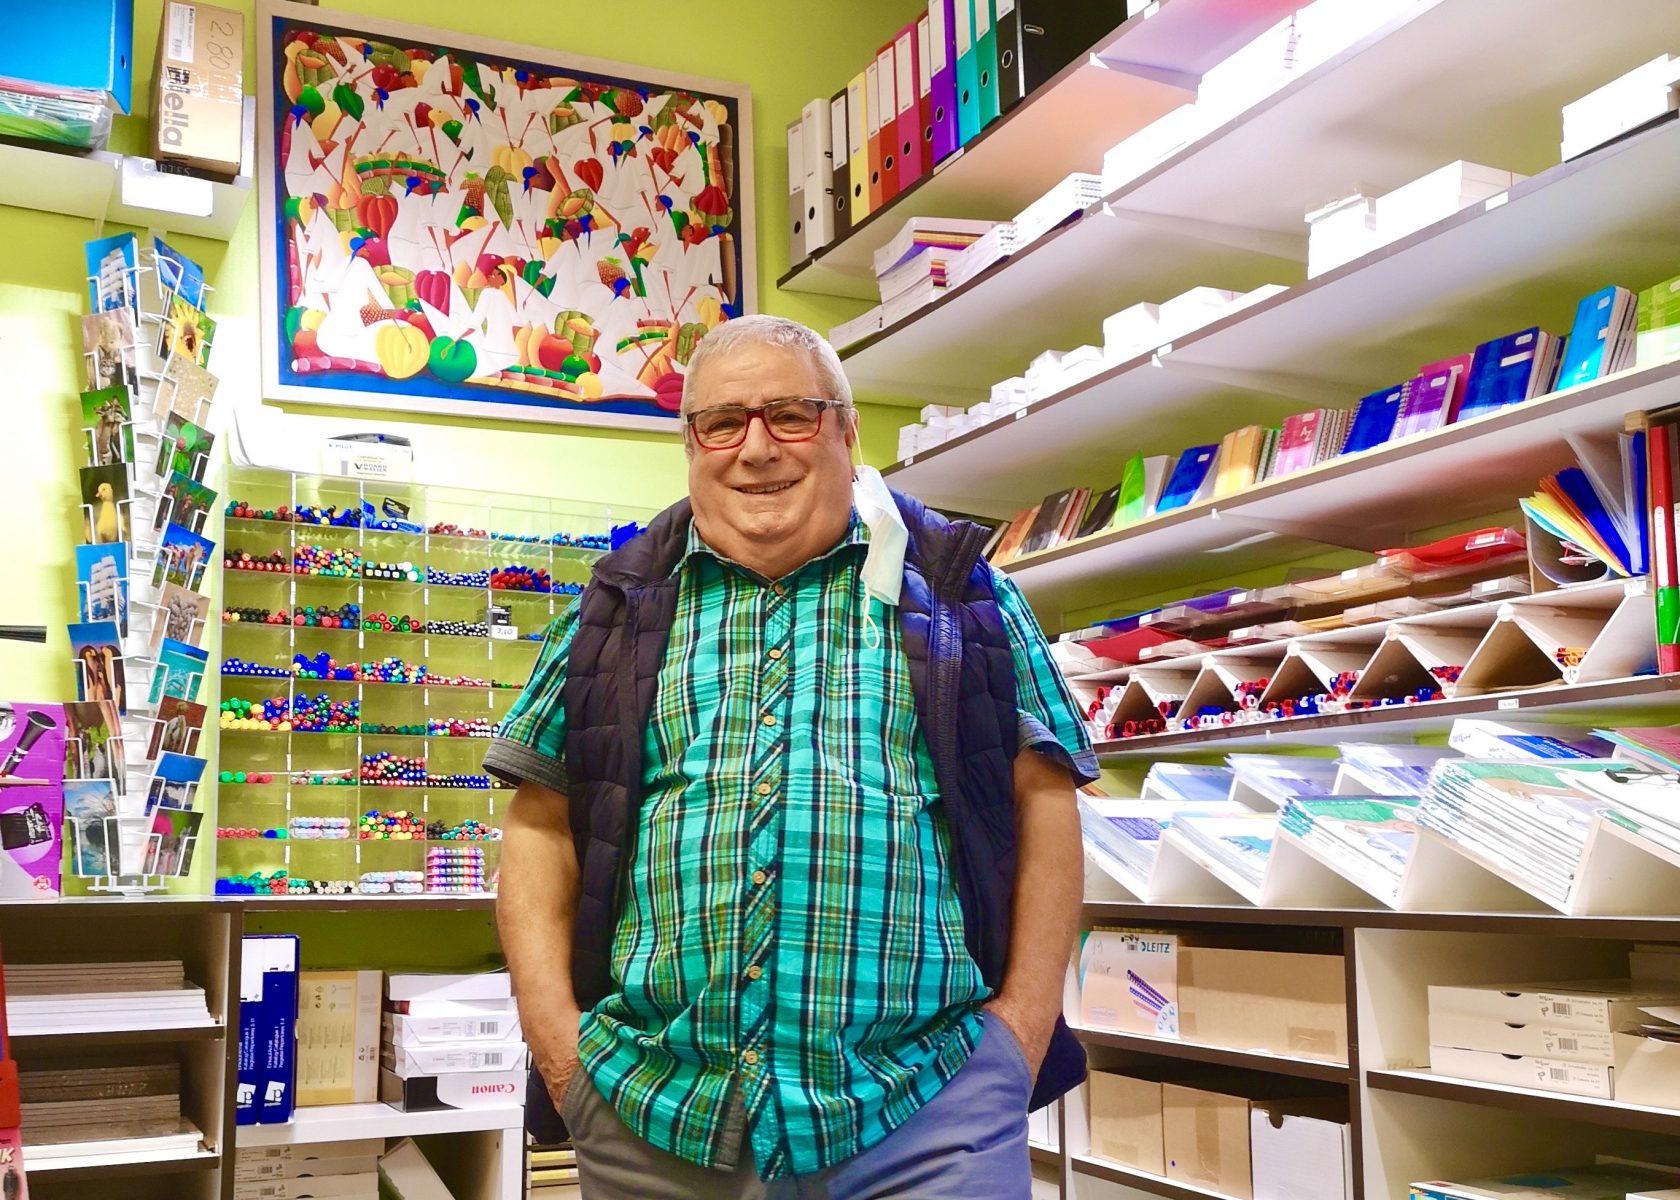 Enrico surrounded by his colorful products inside the stationary store